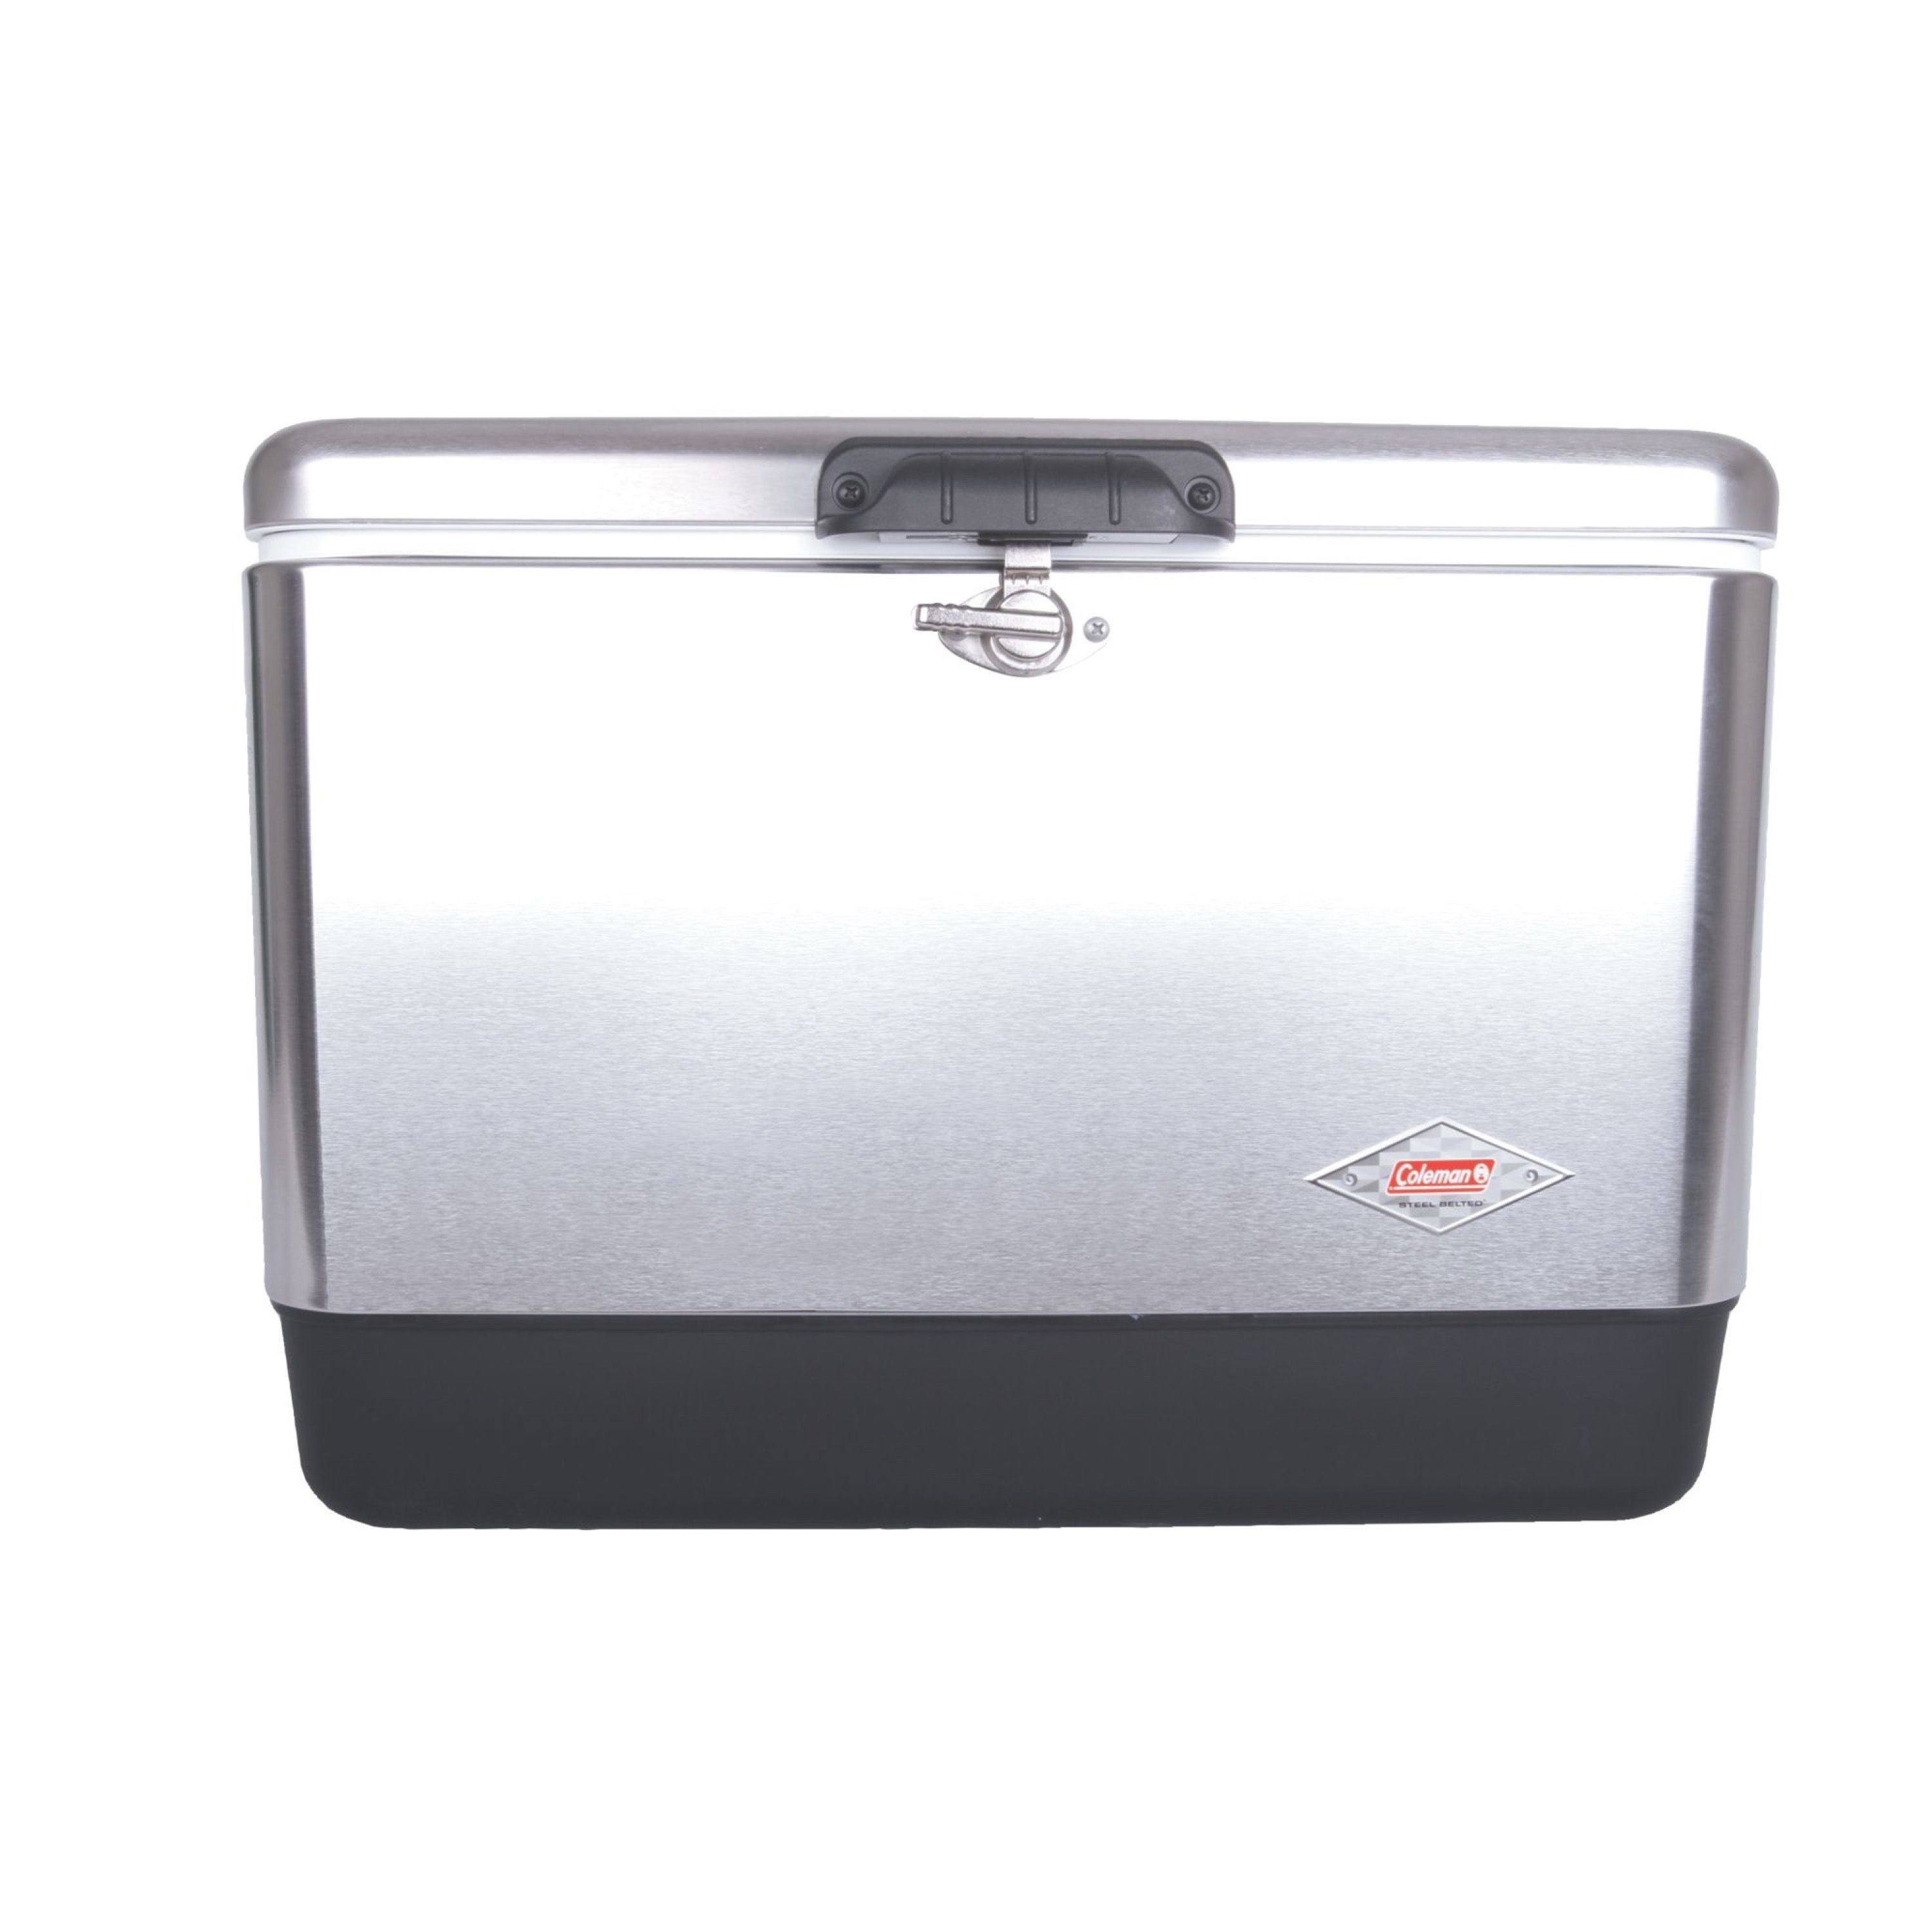 Coleman 54-Quart Steel Belted Cooler, Stainless Steel - image 1 of 7